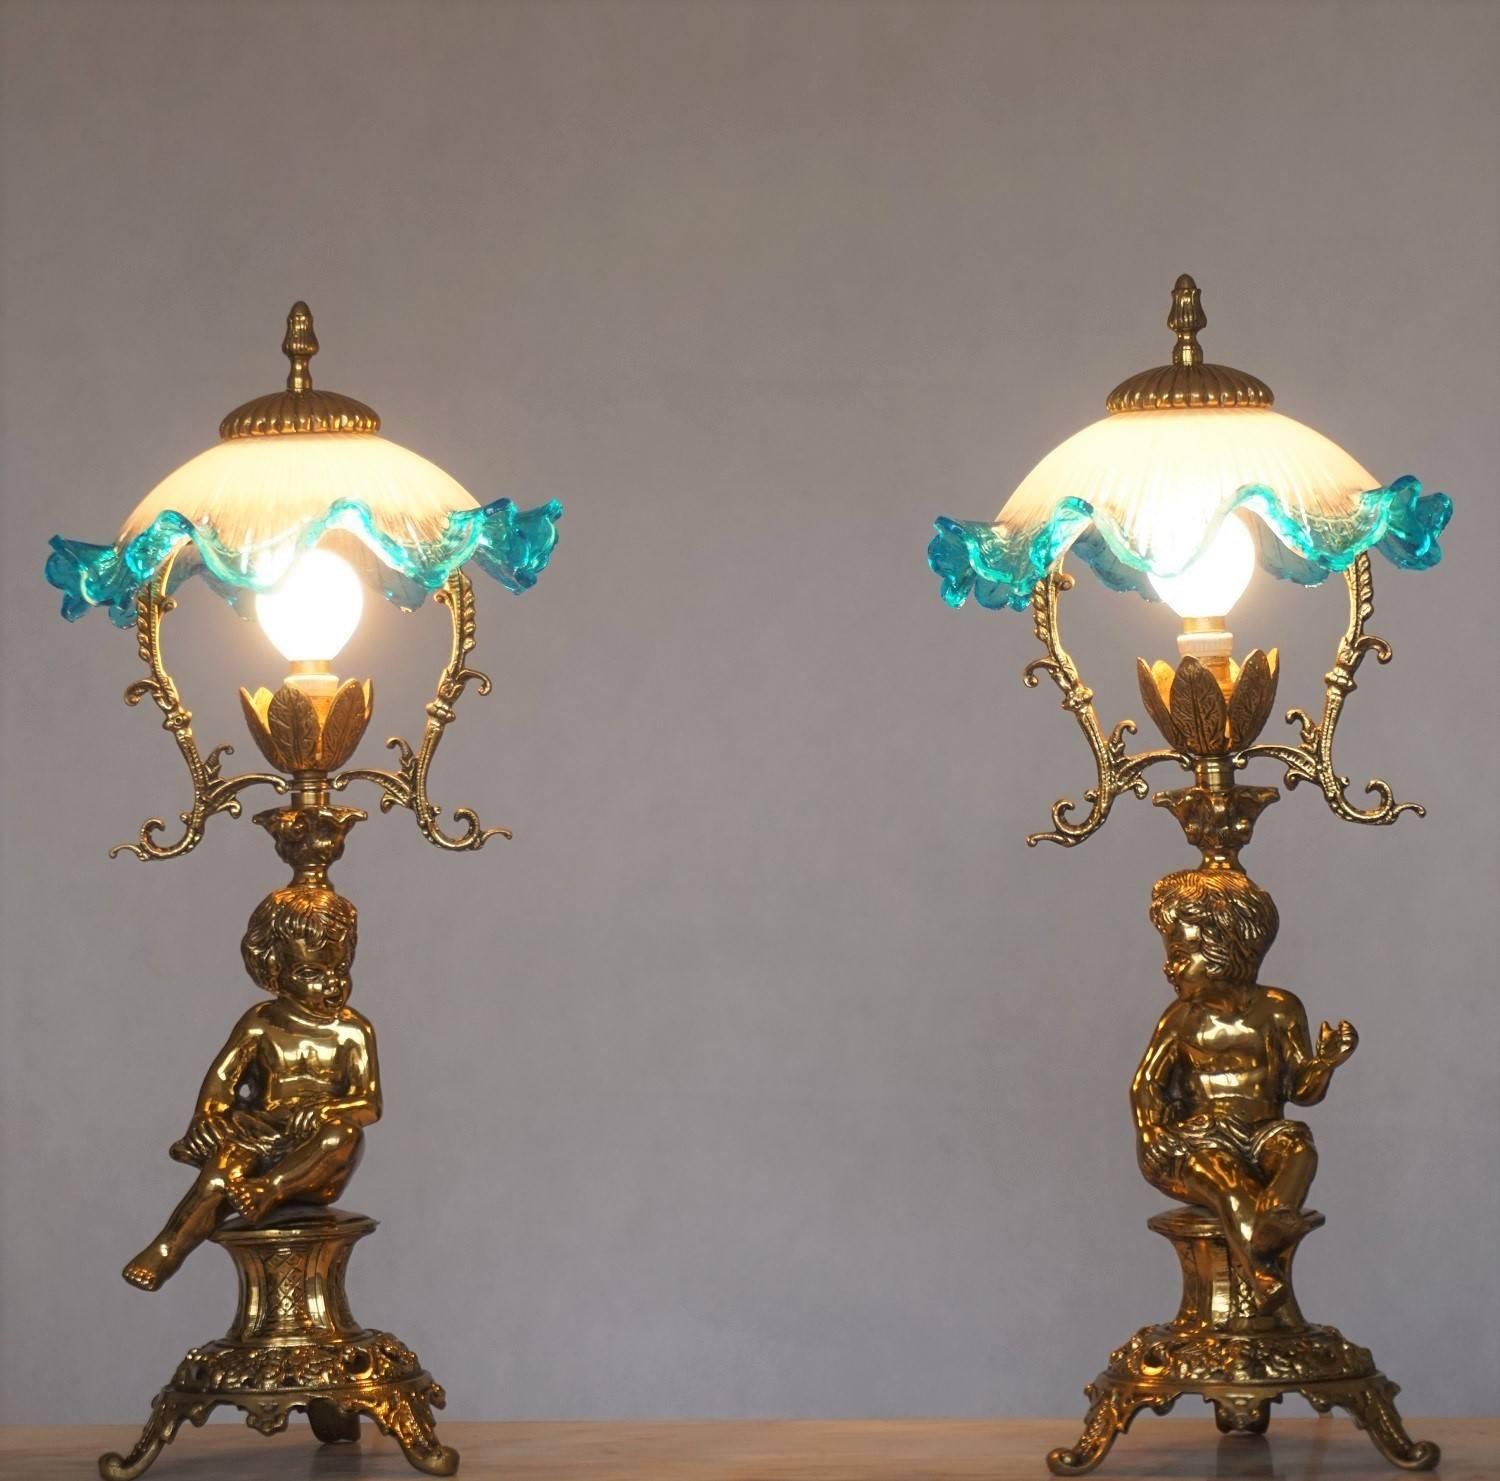 Pair of solid brass cherub table lamps Art Nouveau style, raised on richly ornate plinth base, with large glass flower lampshade, circa 1920.

One lamp socket
Measures: Height 19.75 in (50 cm)
Diameter 9.50 in (24 cm)
Base D 6 in (15 cm) 

Please